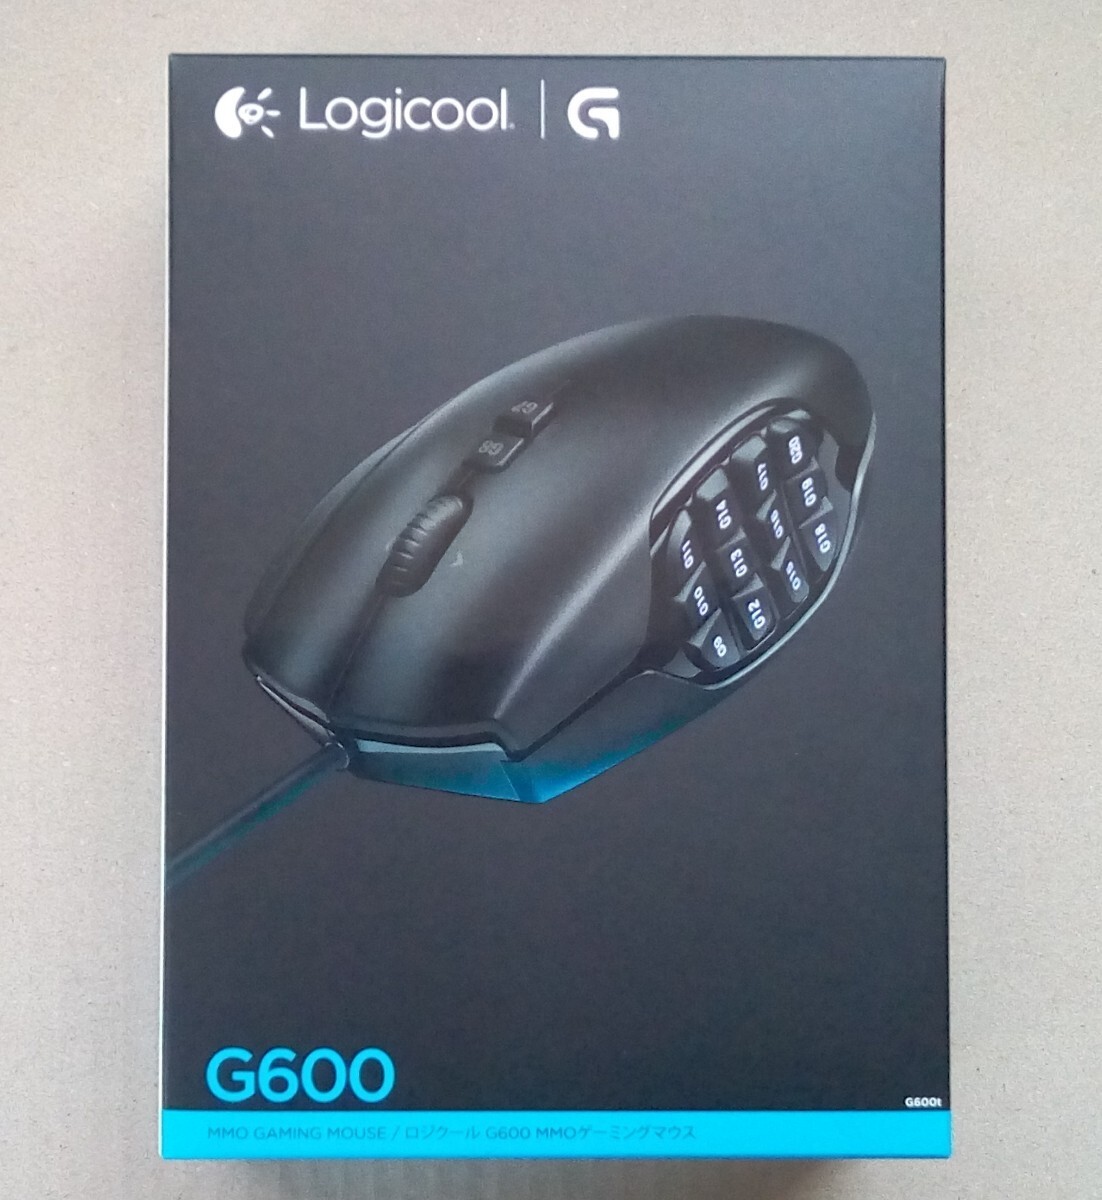  Logicool ge-ming mouse G600 wire Logicool